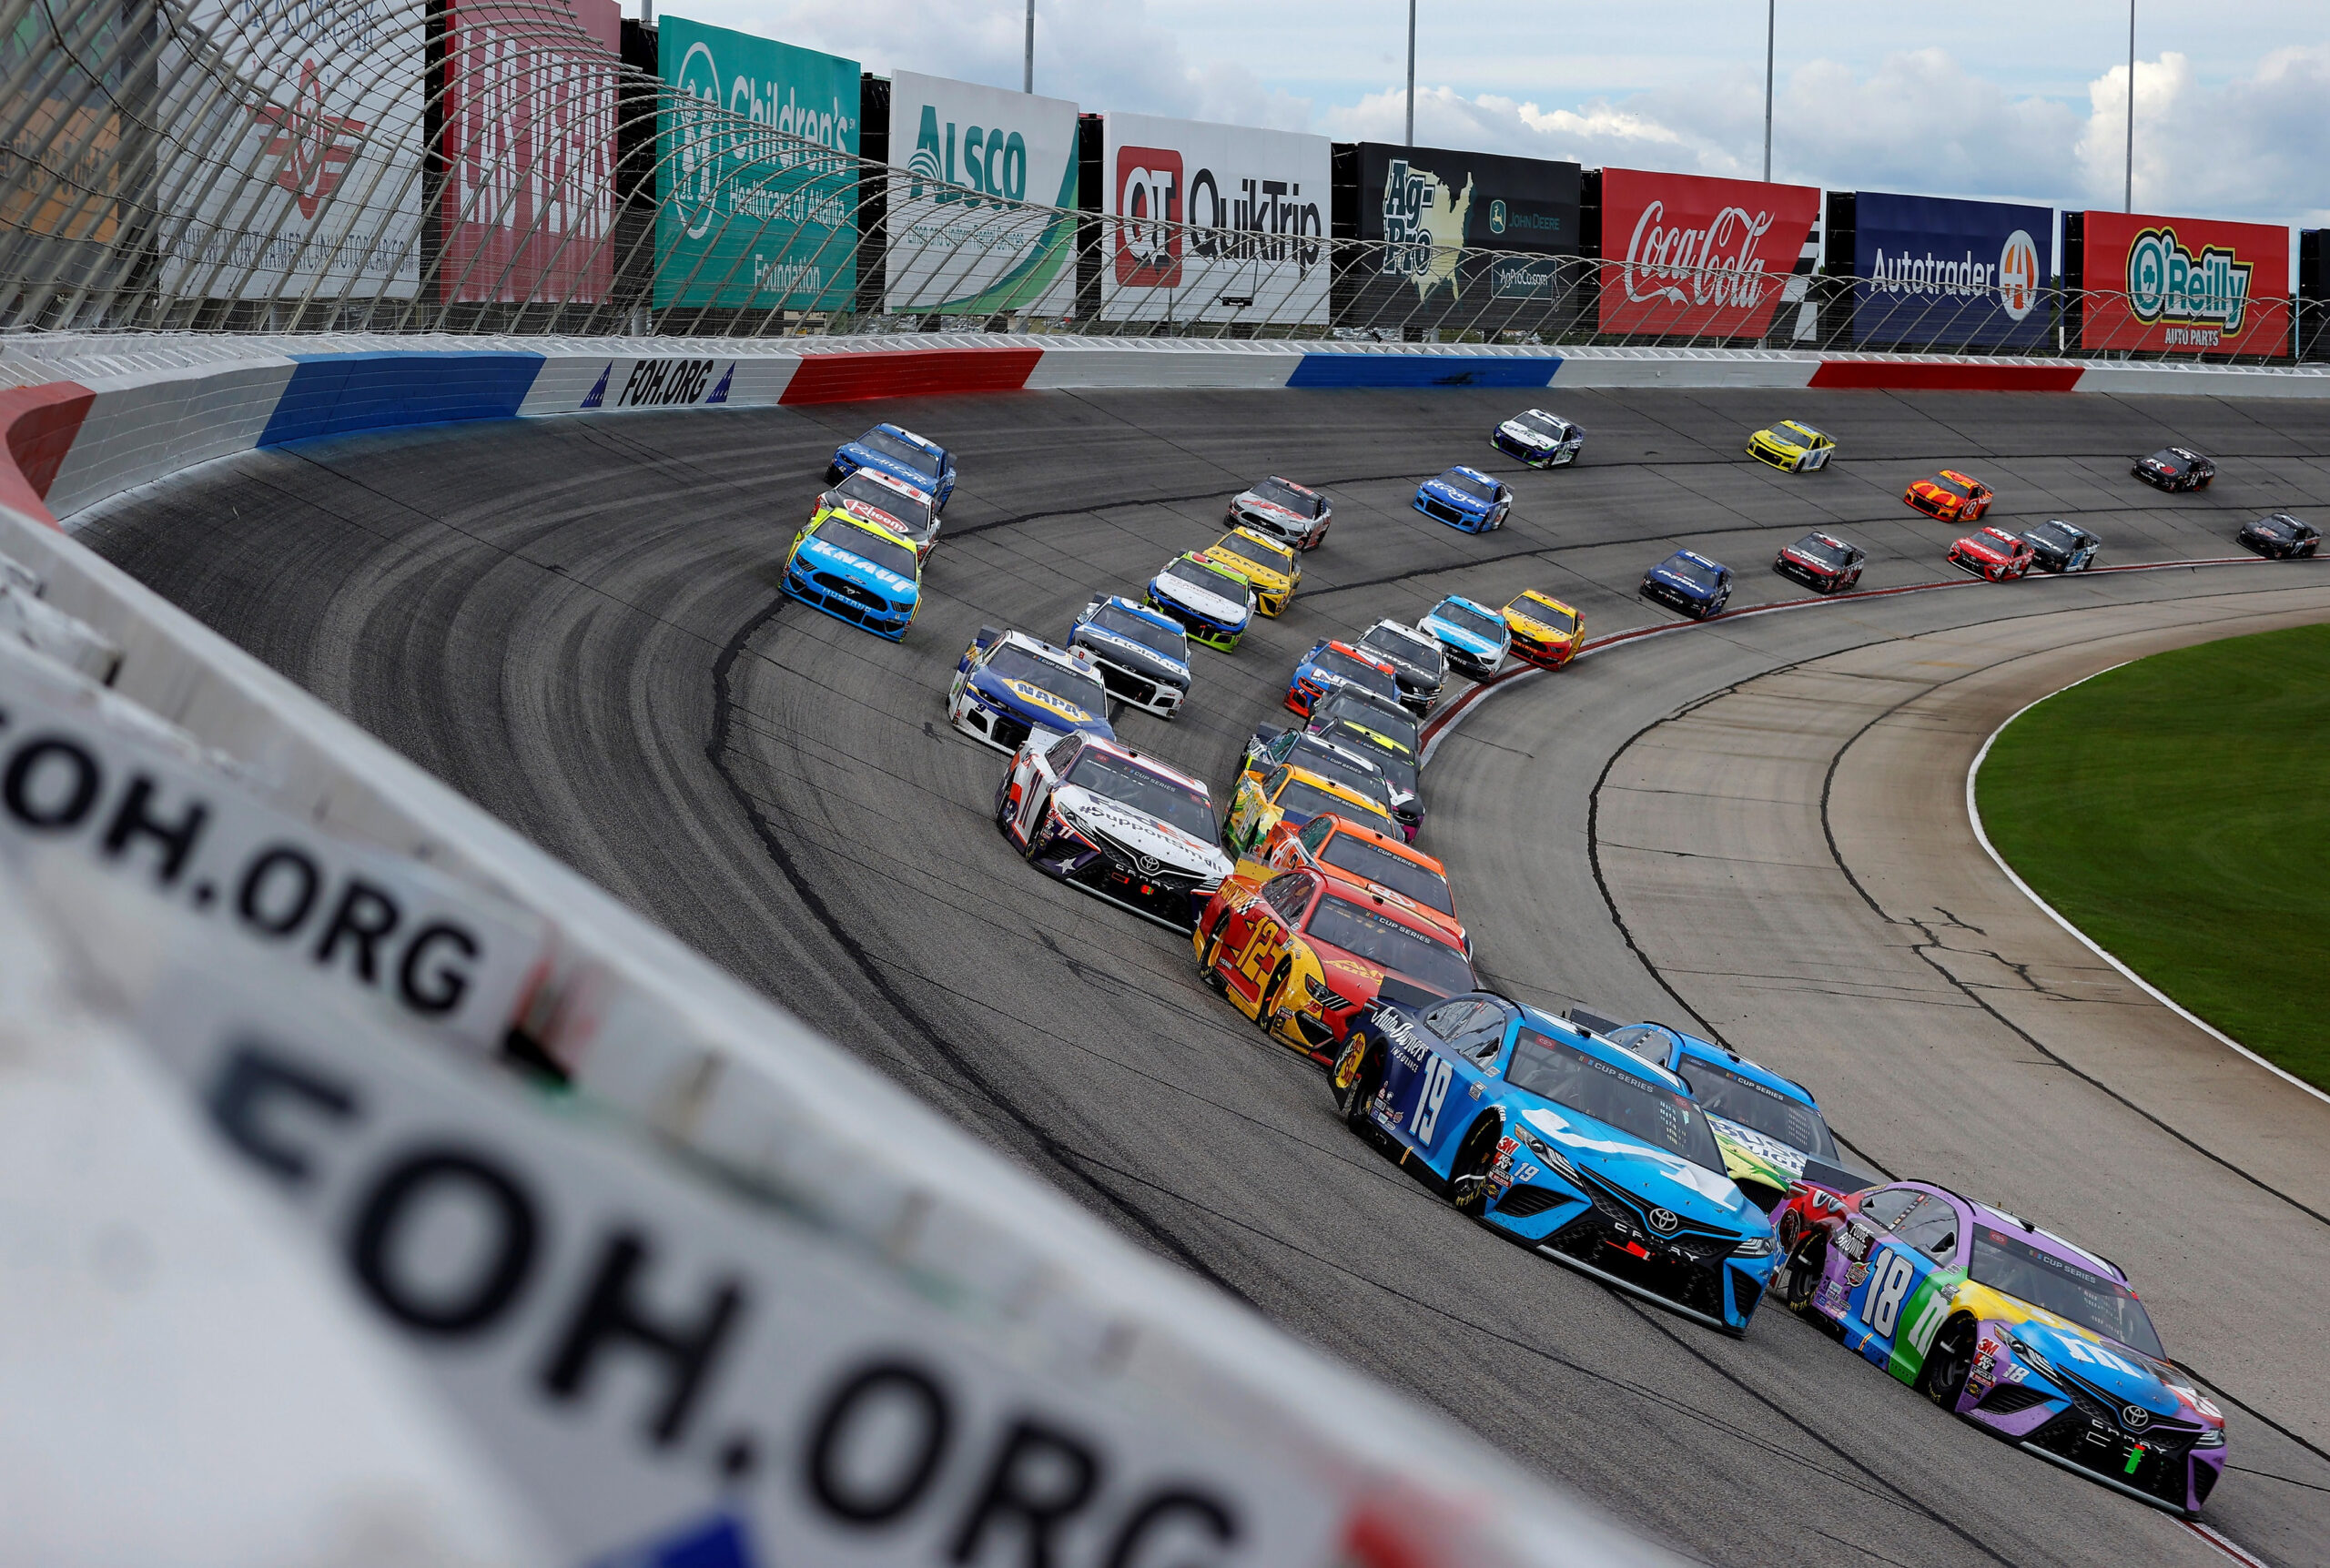 Sunday grandstand tickets sold out for Atlanta’s March NASCAR weekend